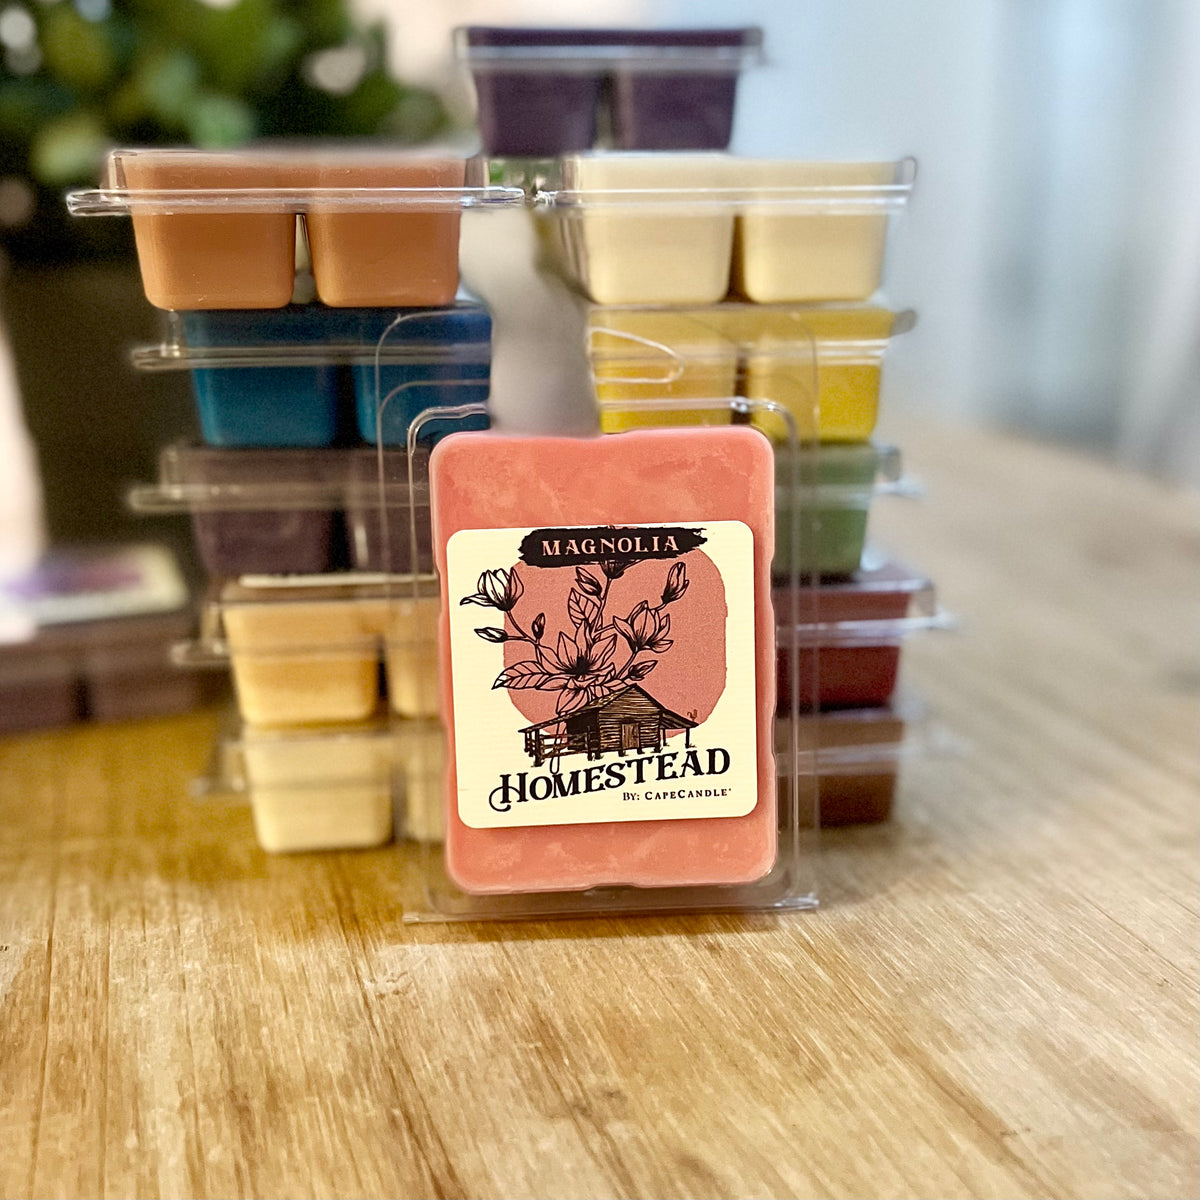 Magnolia 3.5oz Homestead Soy Wax Melts by Cape Candle